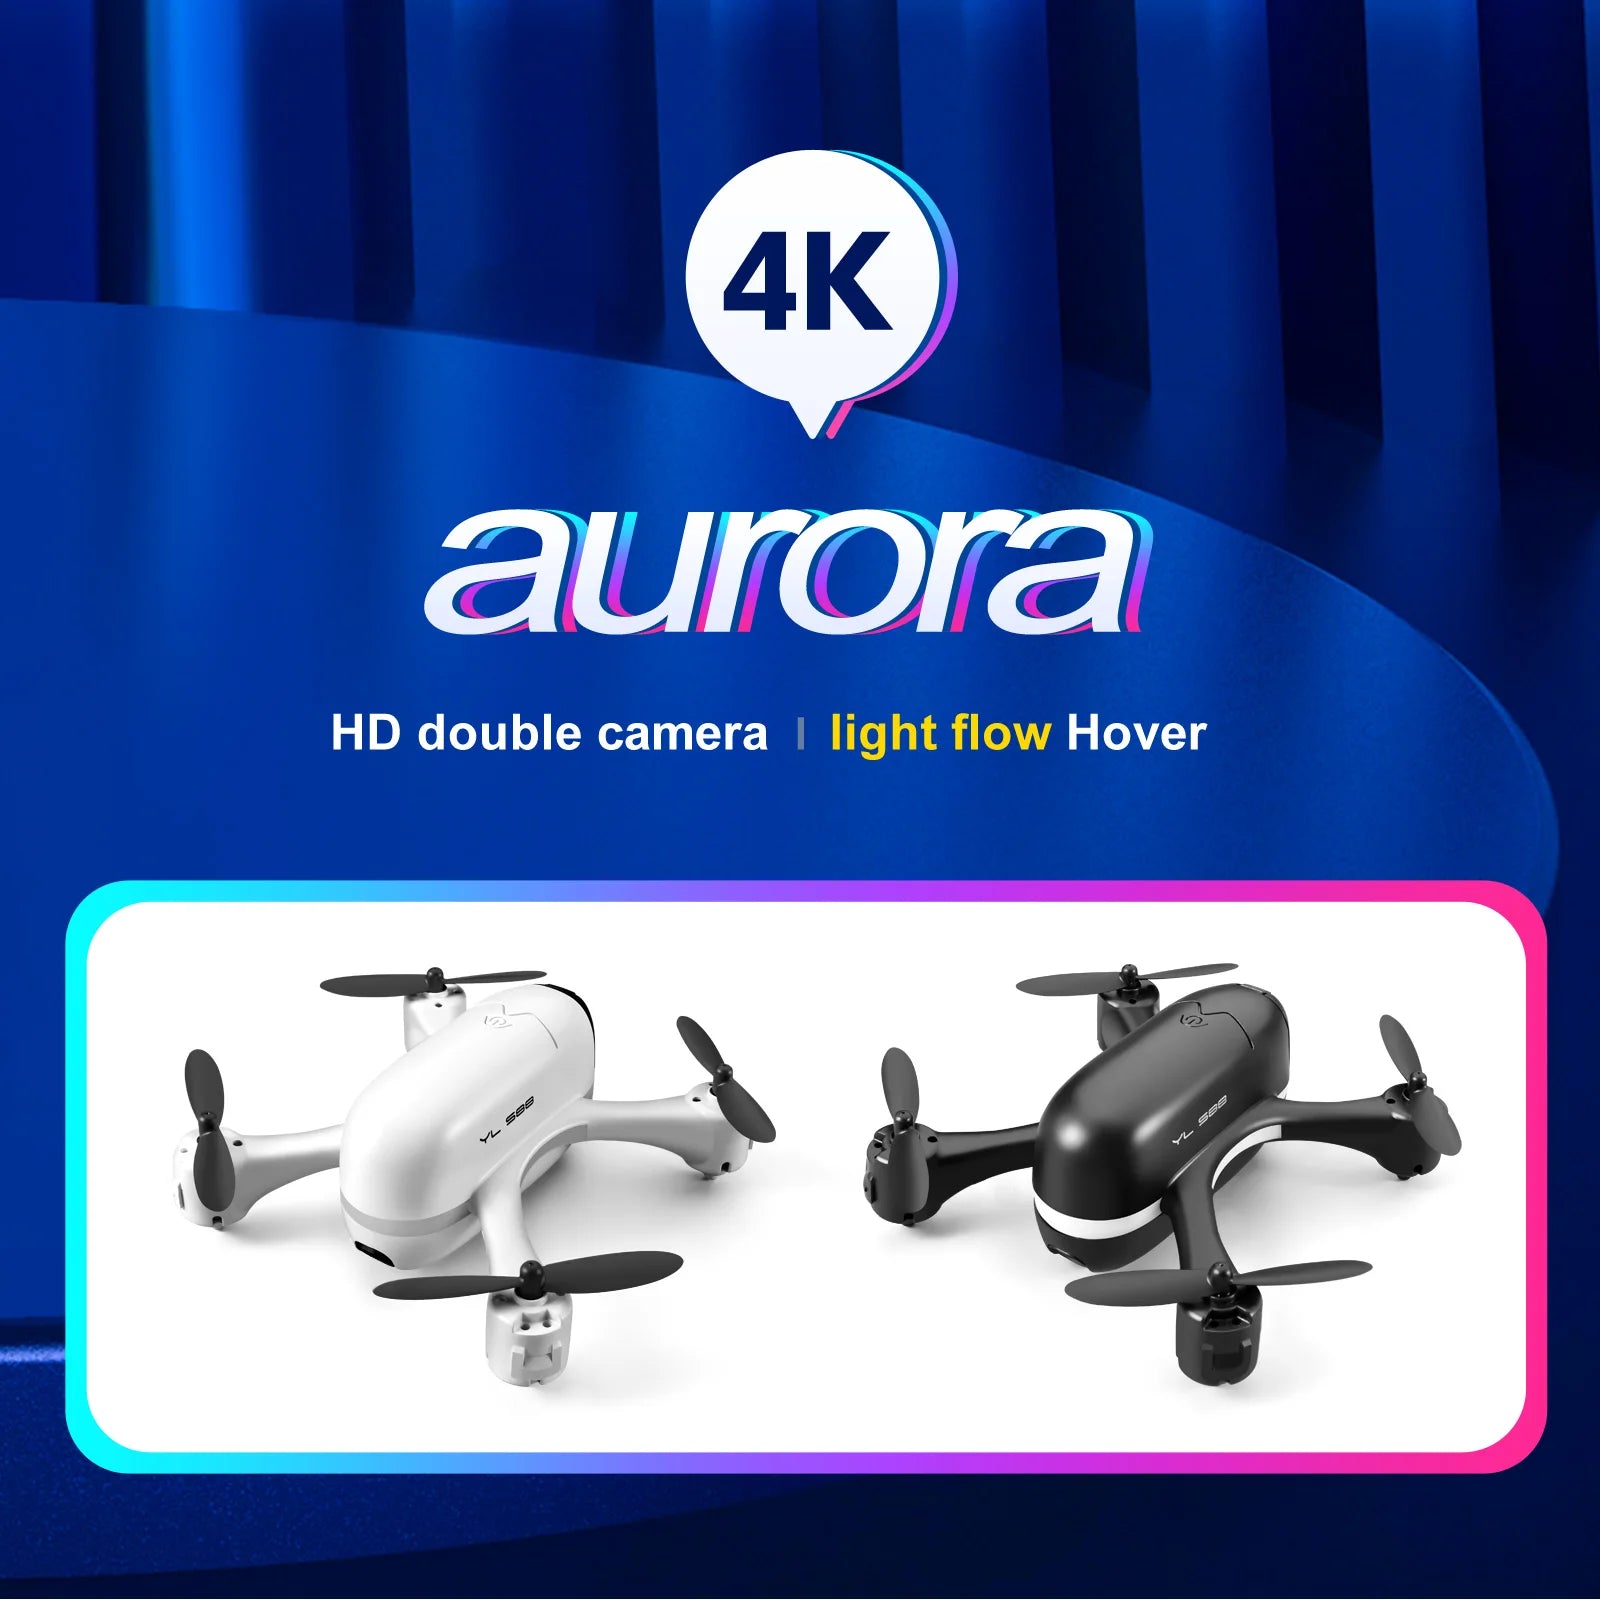 S88 Drone, 4k aurora hd double camera light flow hover 58